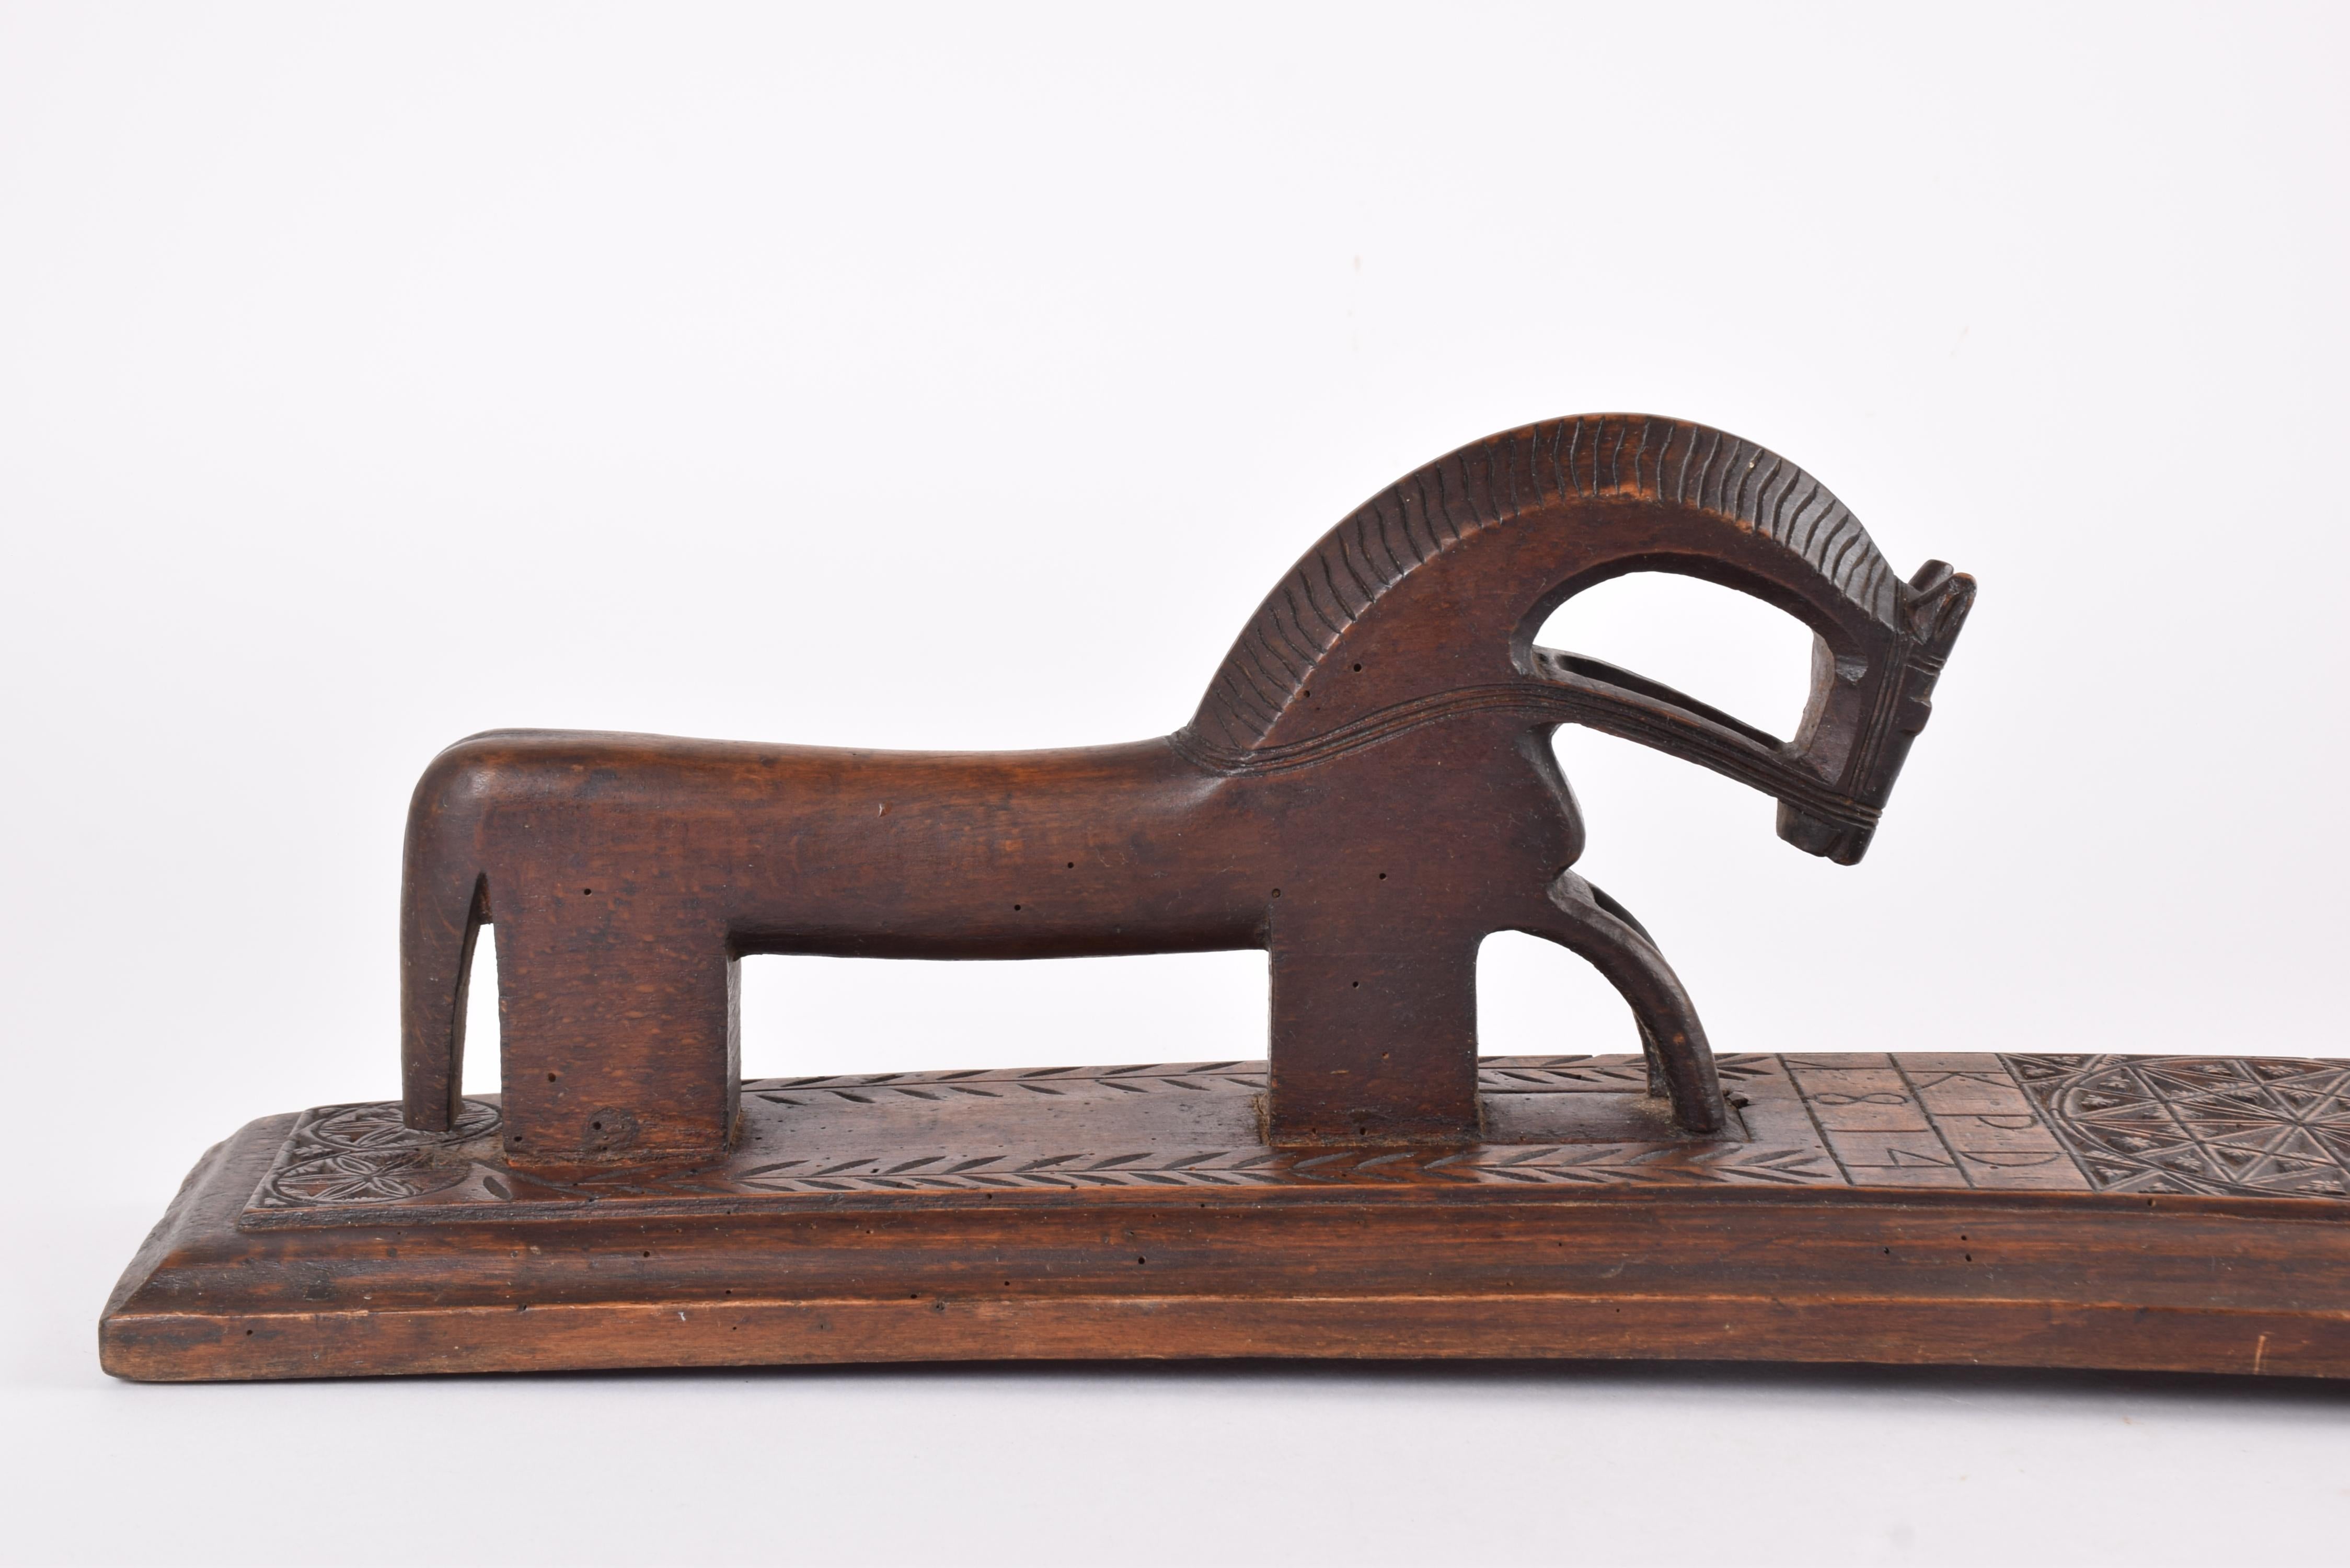 Antique Danish Wooden Mangle Board Wedding Love Gift with Horse Dated 1814 For Sale 6